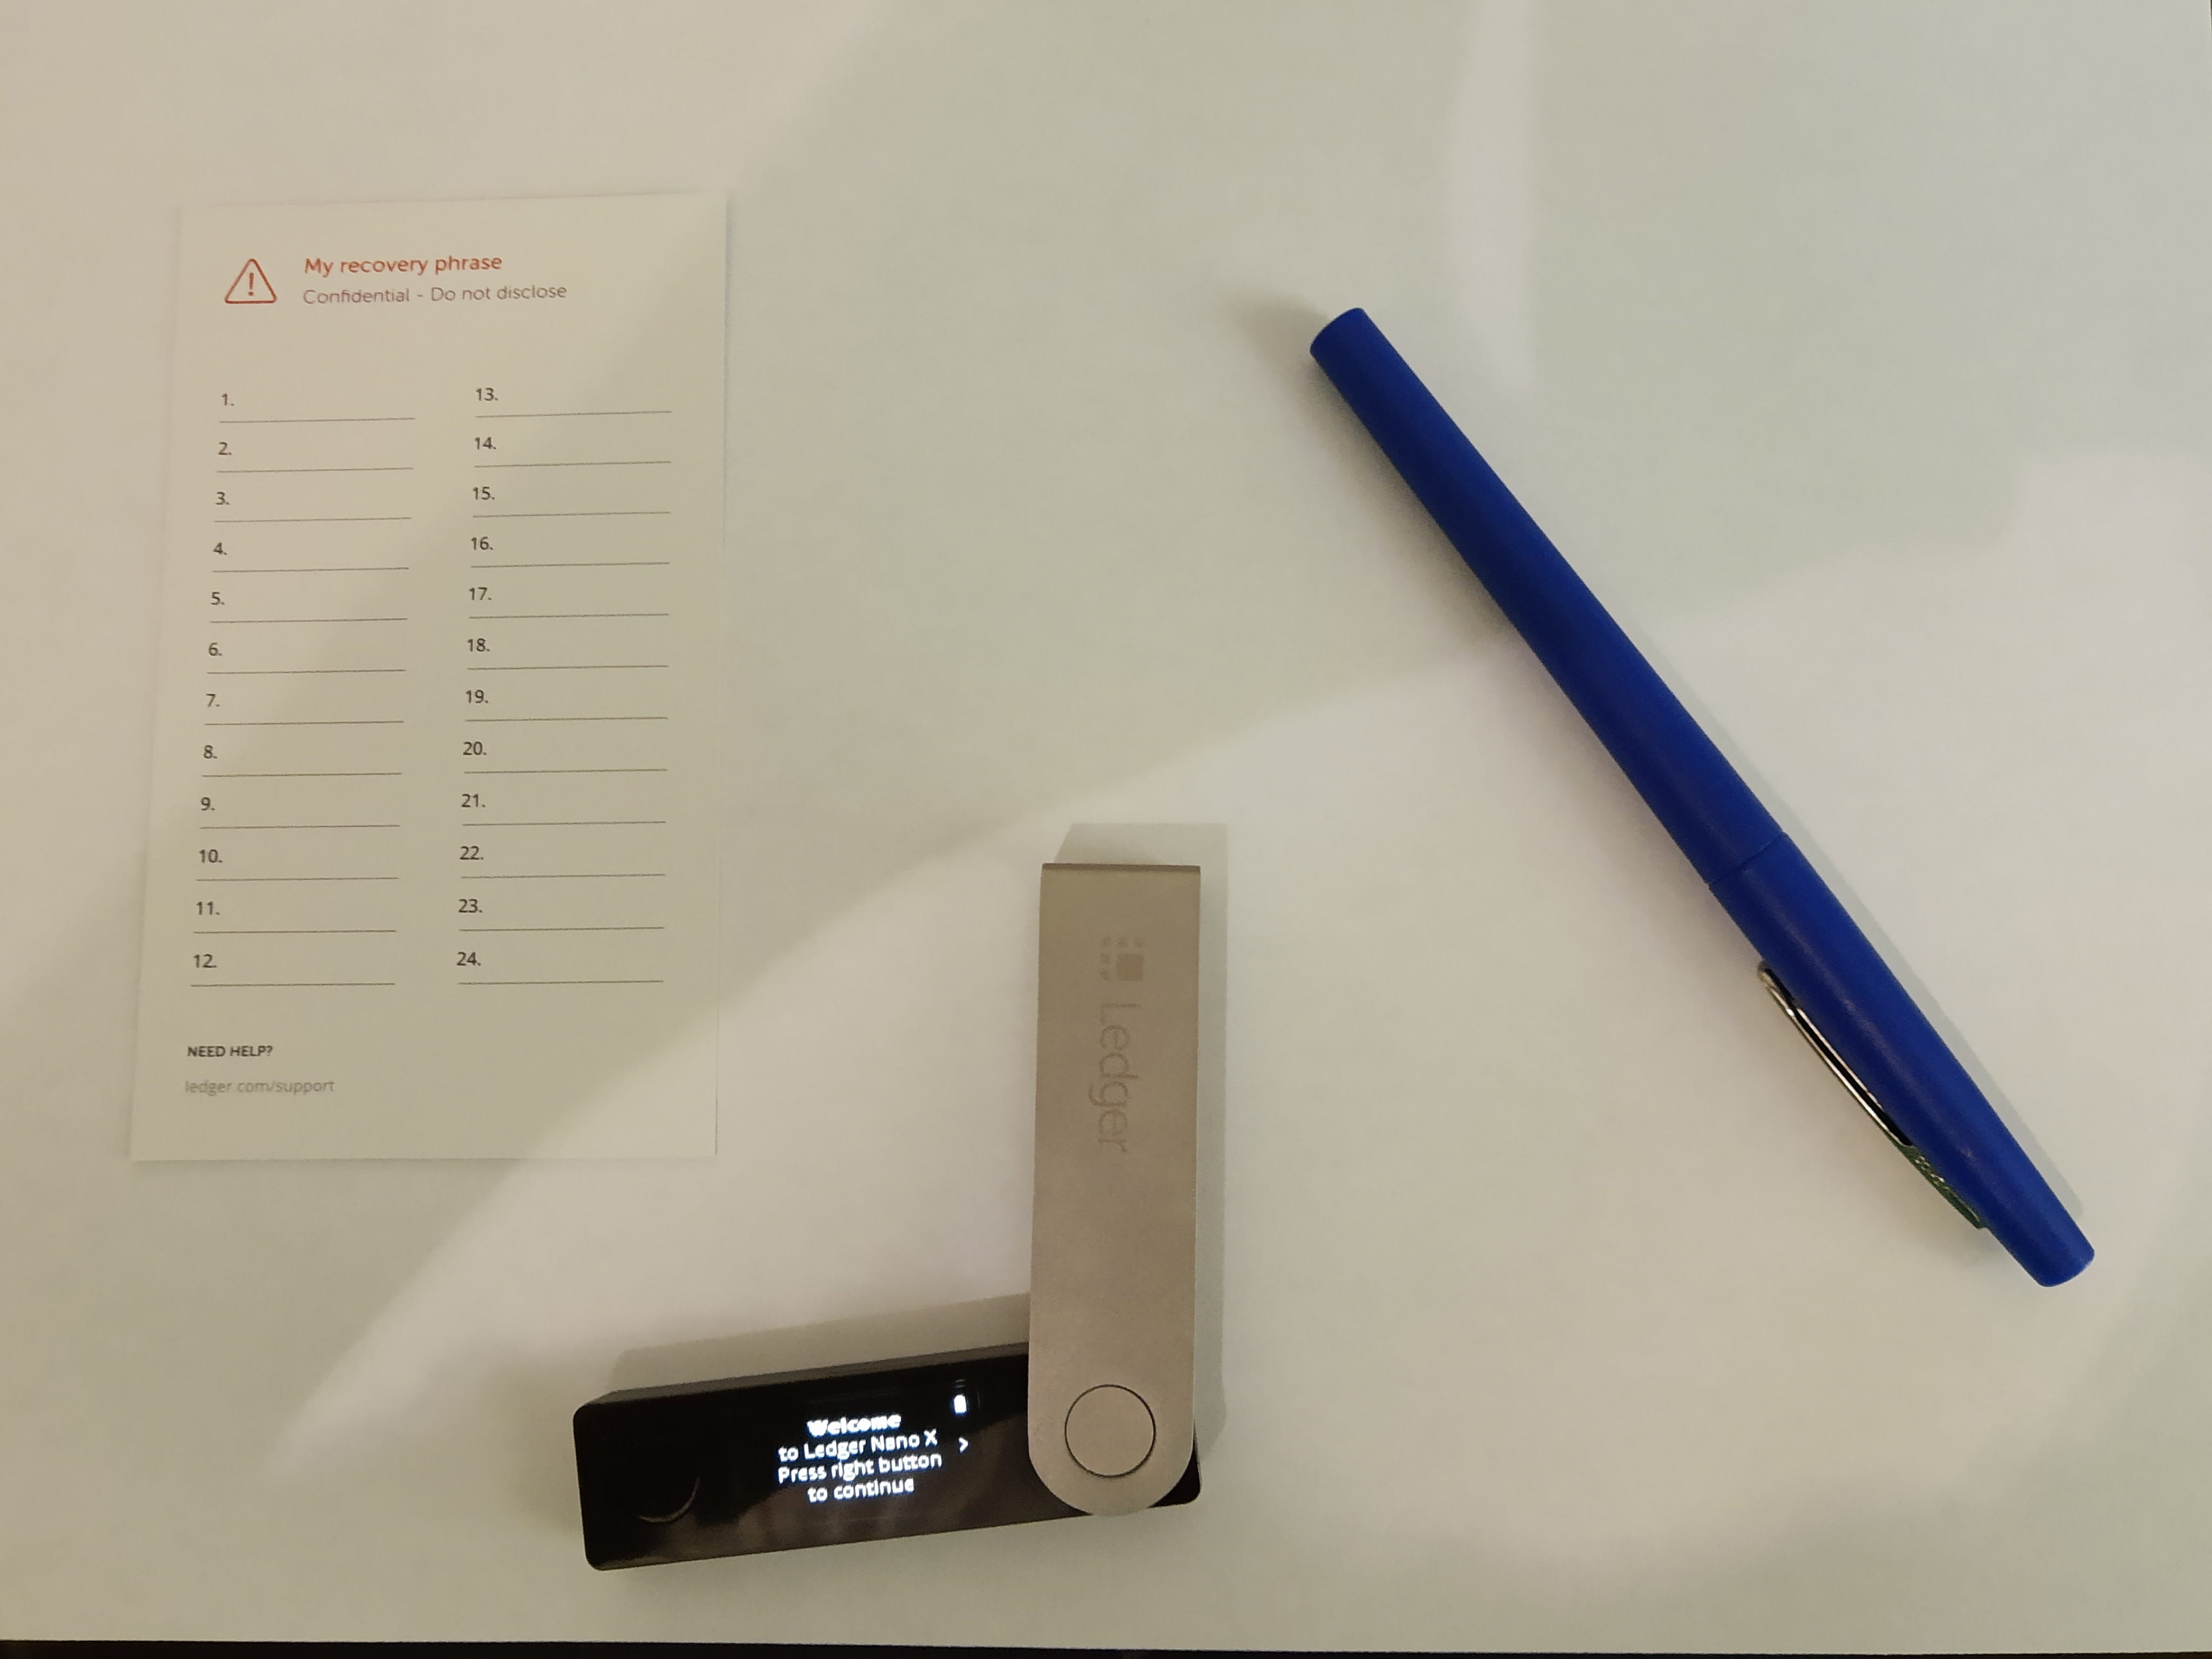 Set up and restore a ledger nano X with an optional passphrase or 25th-word  | by Took Drums | Medium